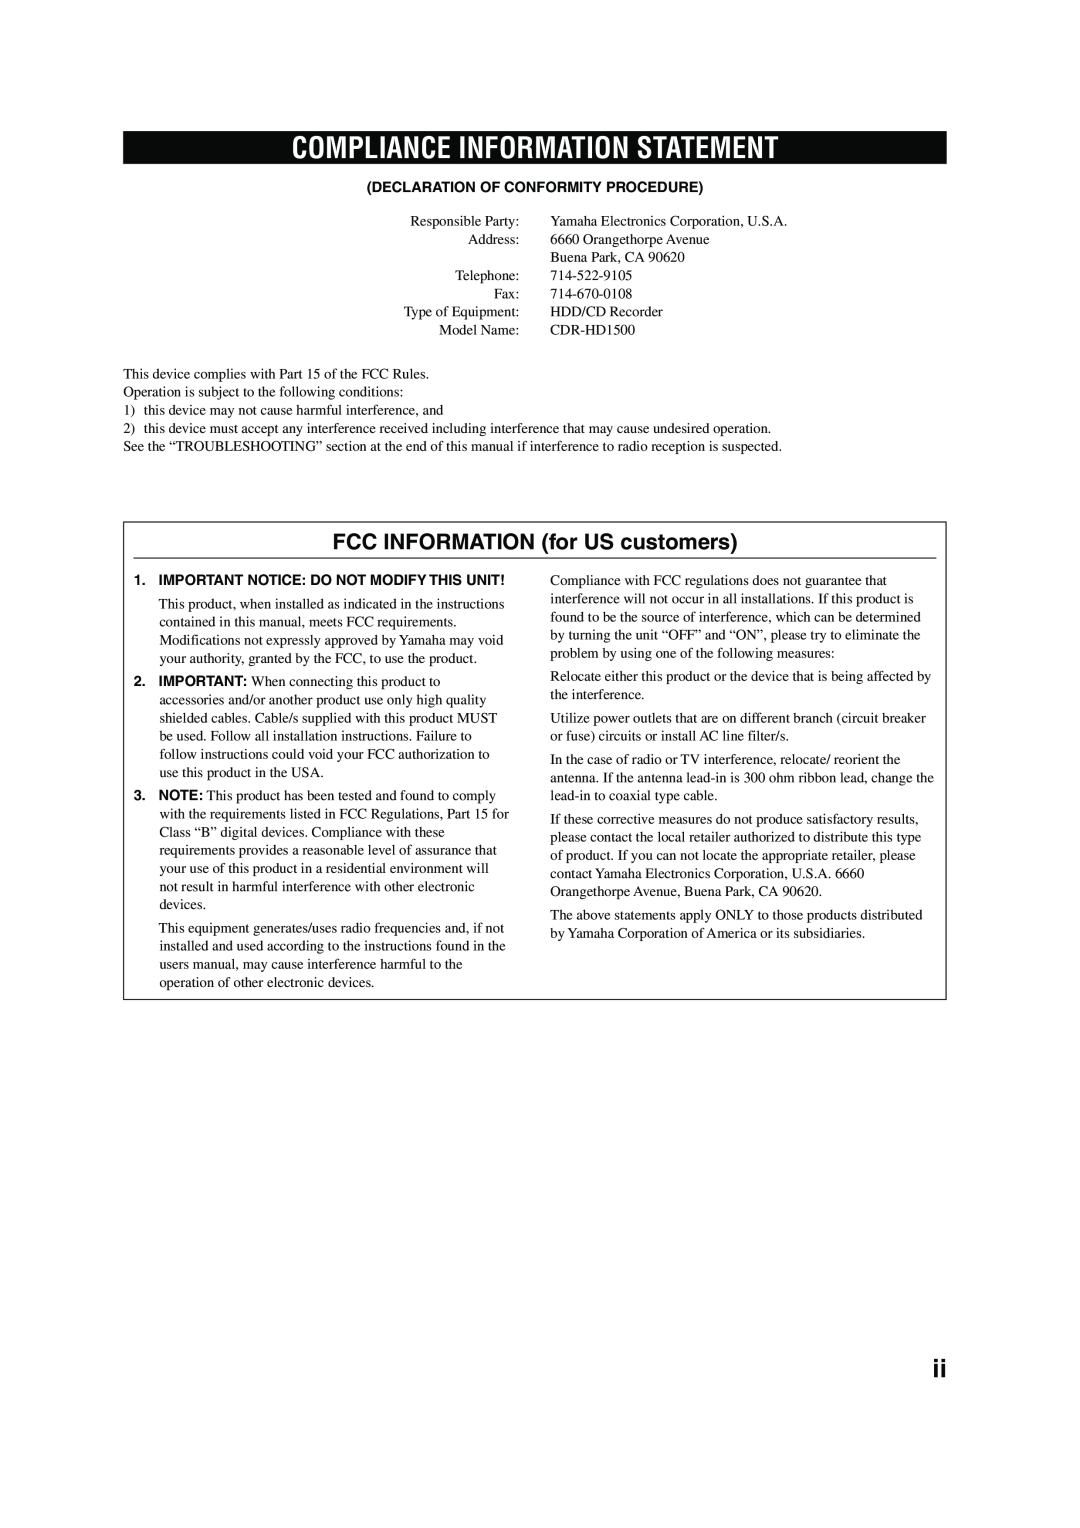 Yamaha CDR-HD 1500 owner manual Compliance Information Statement, FCC INFORMATION for US customers 